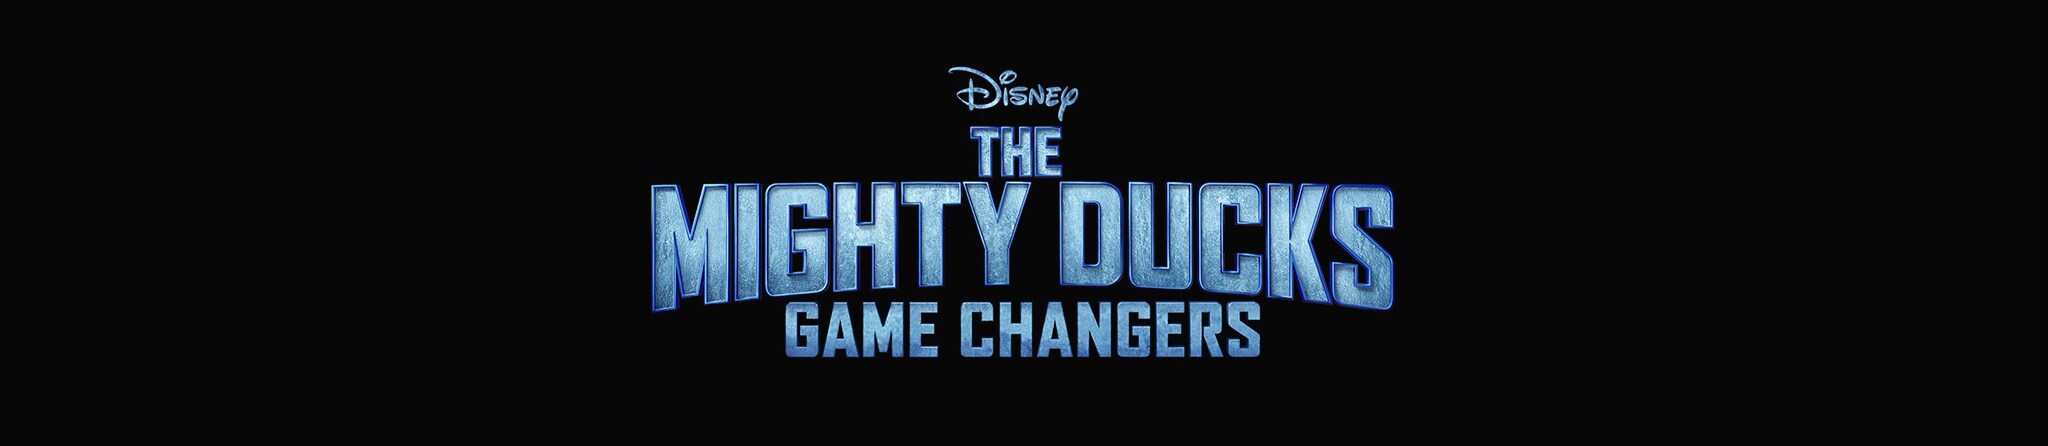 Disney | The Mighty Ducks: Game Changers